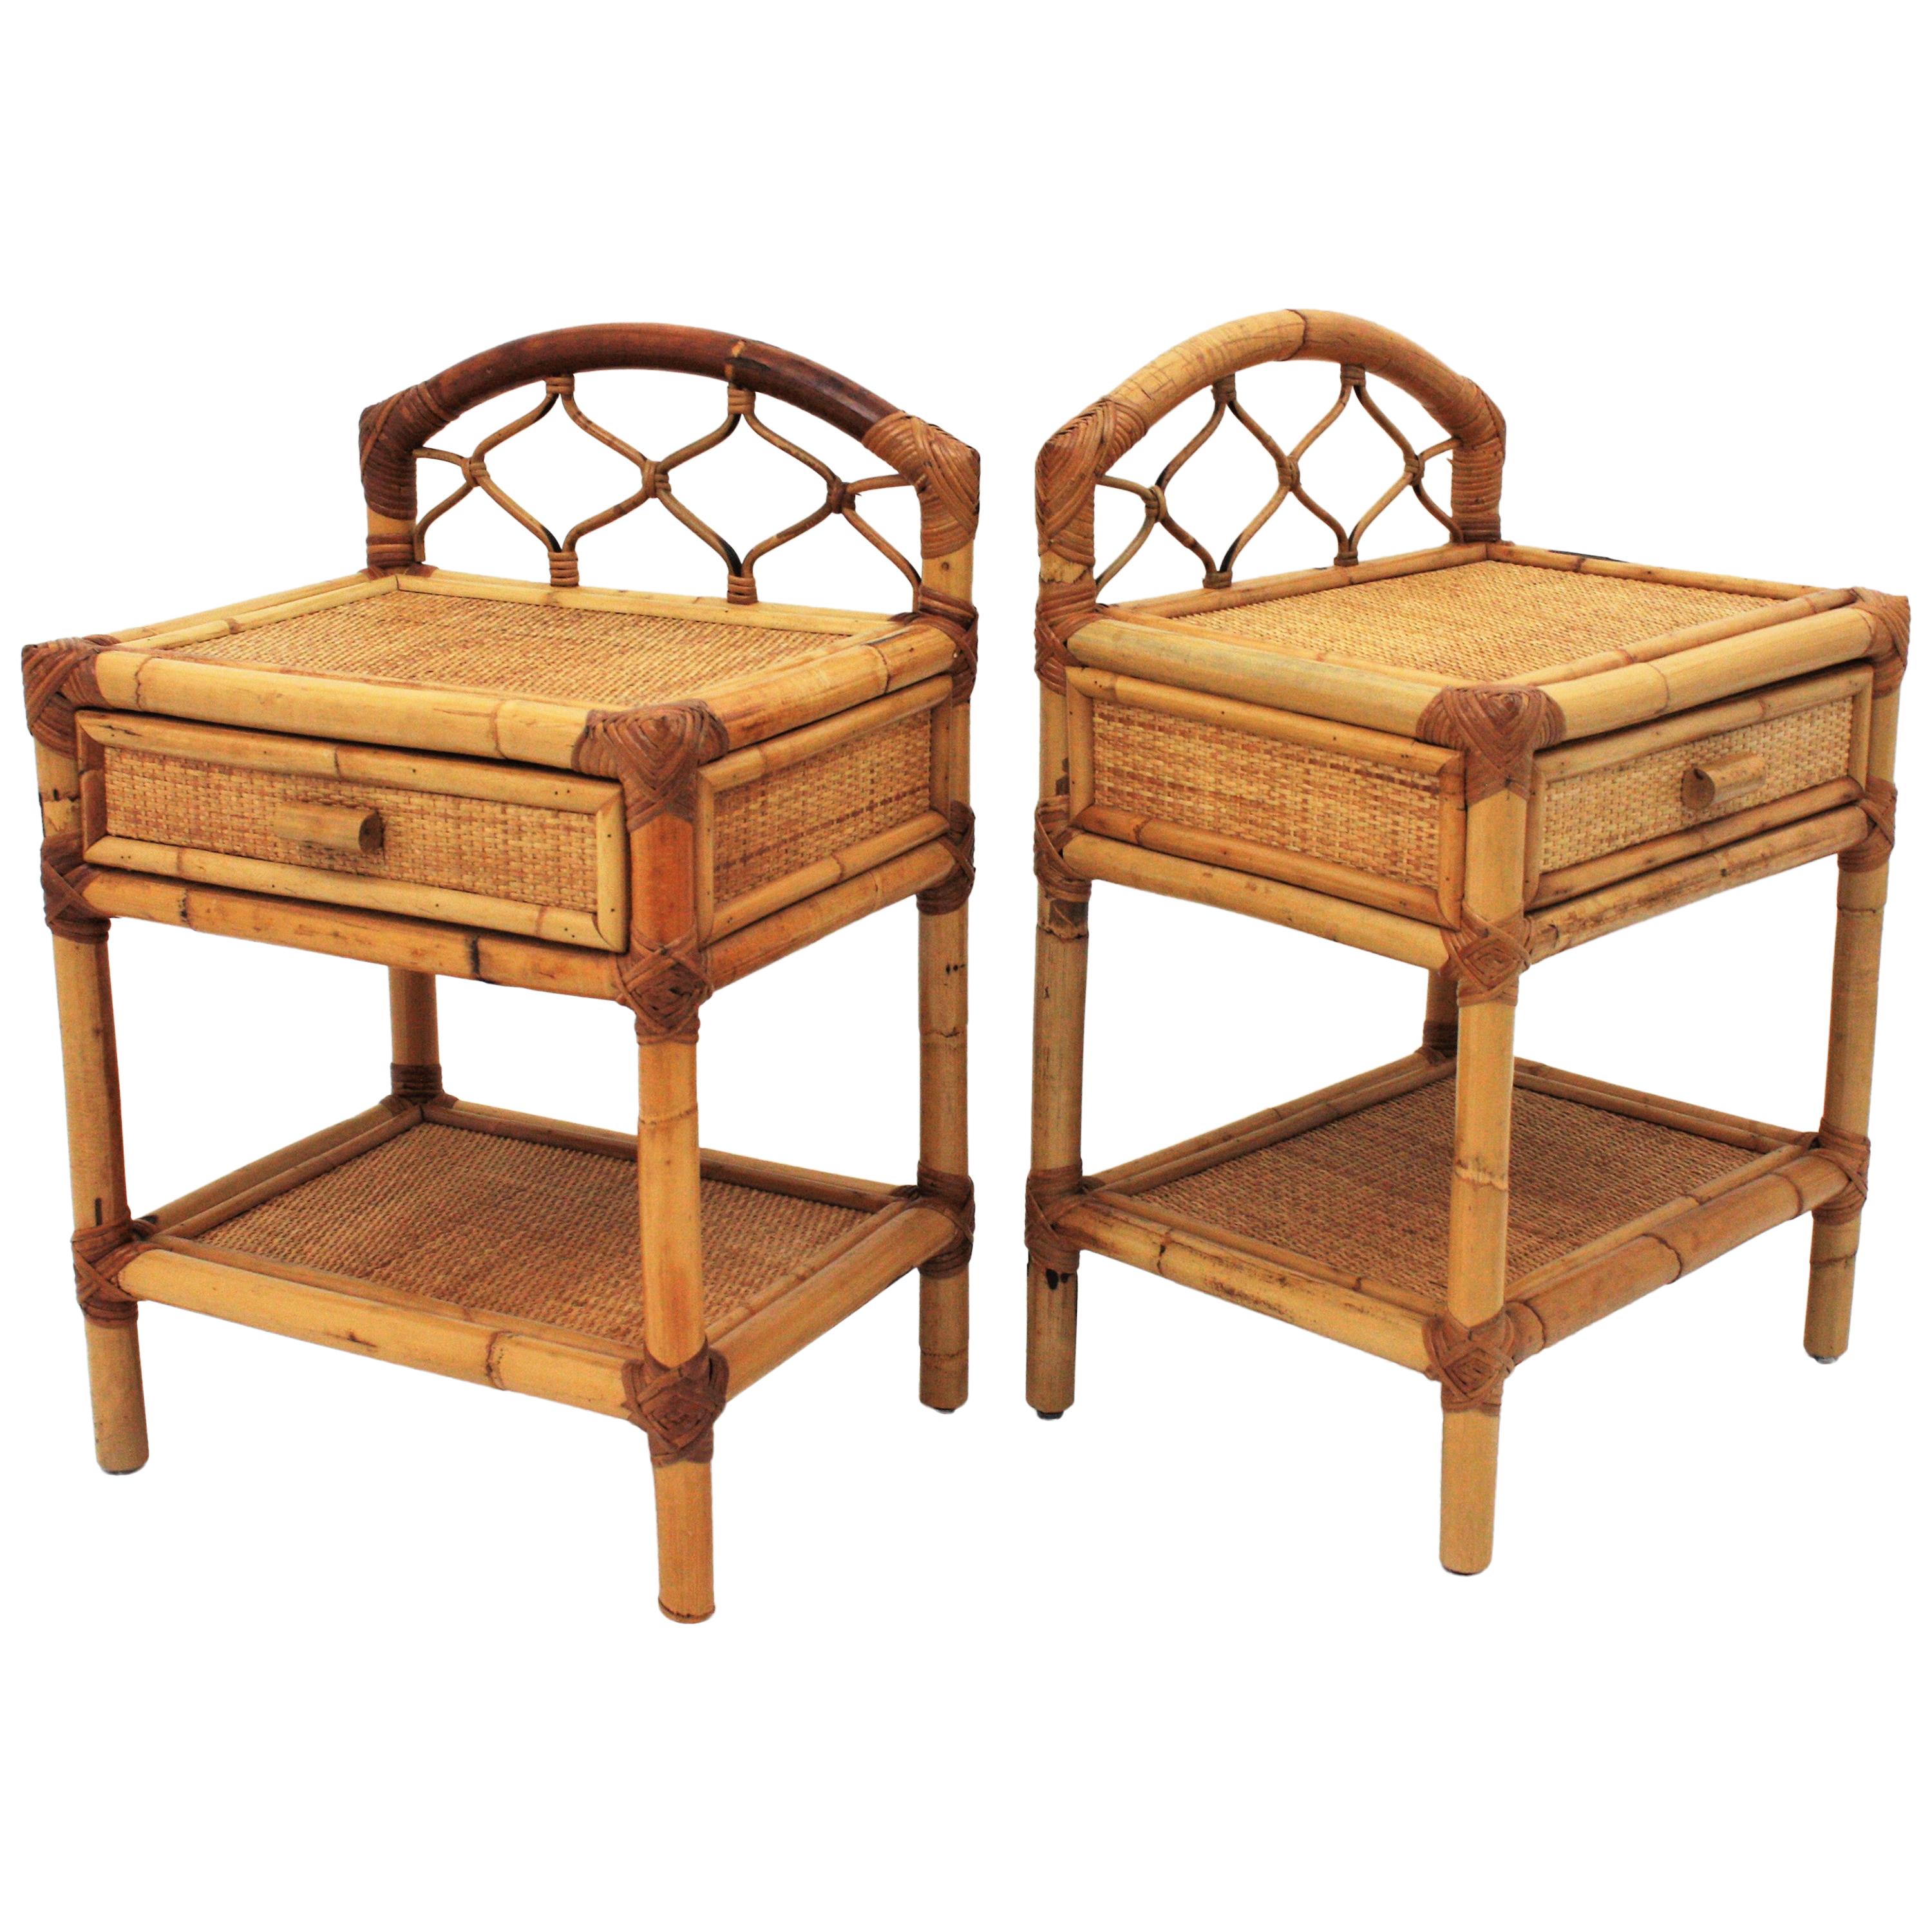 Pair of Bamboo and Woven Rattan Nightstands End Tables or Small Chests, 1970s